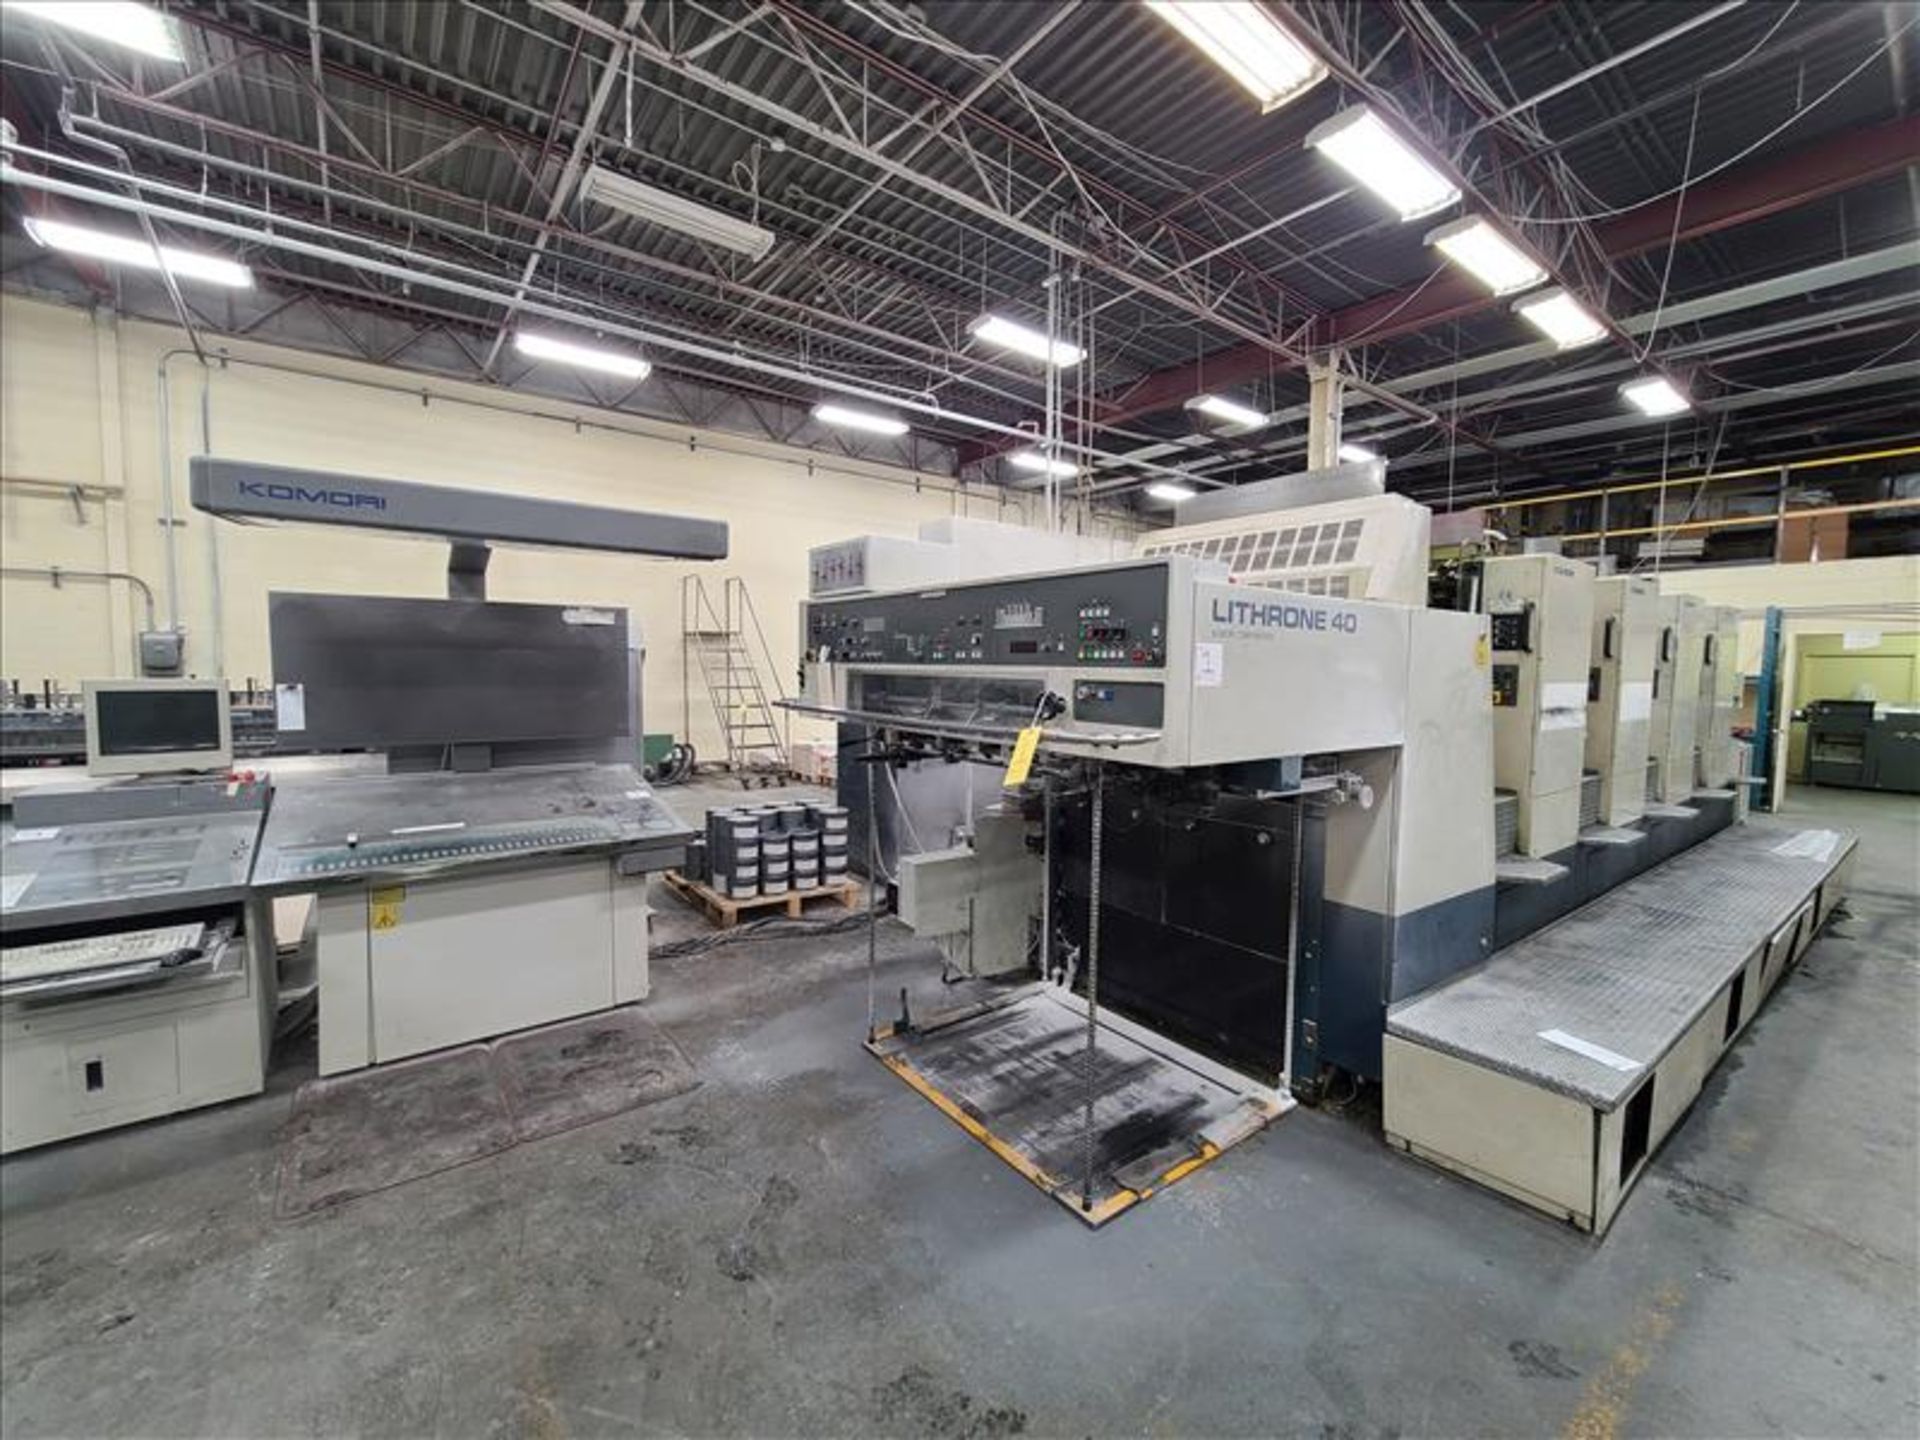 Komori 4-color offset printing press, Series Lithrone 40, model L-440, S/N.2202 approx. 68